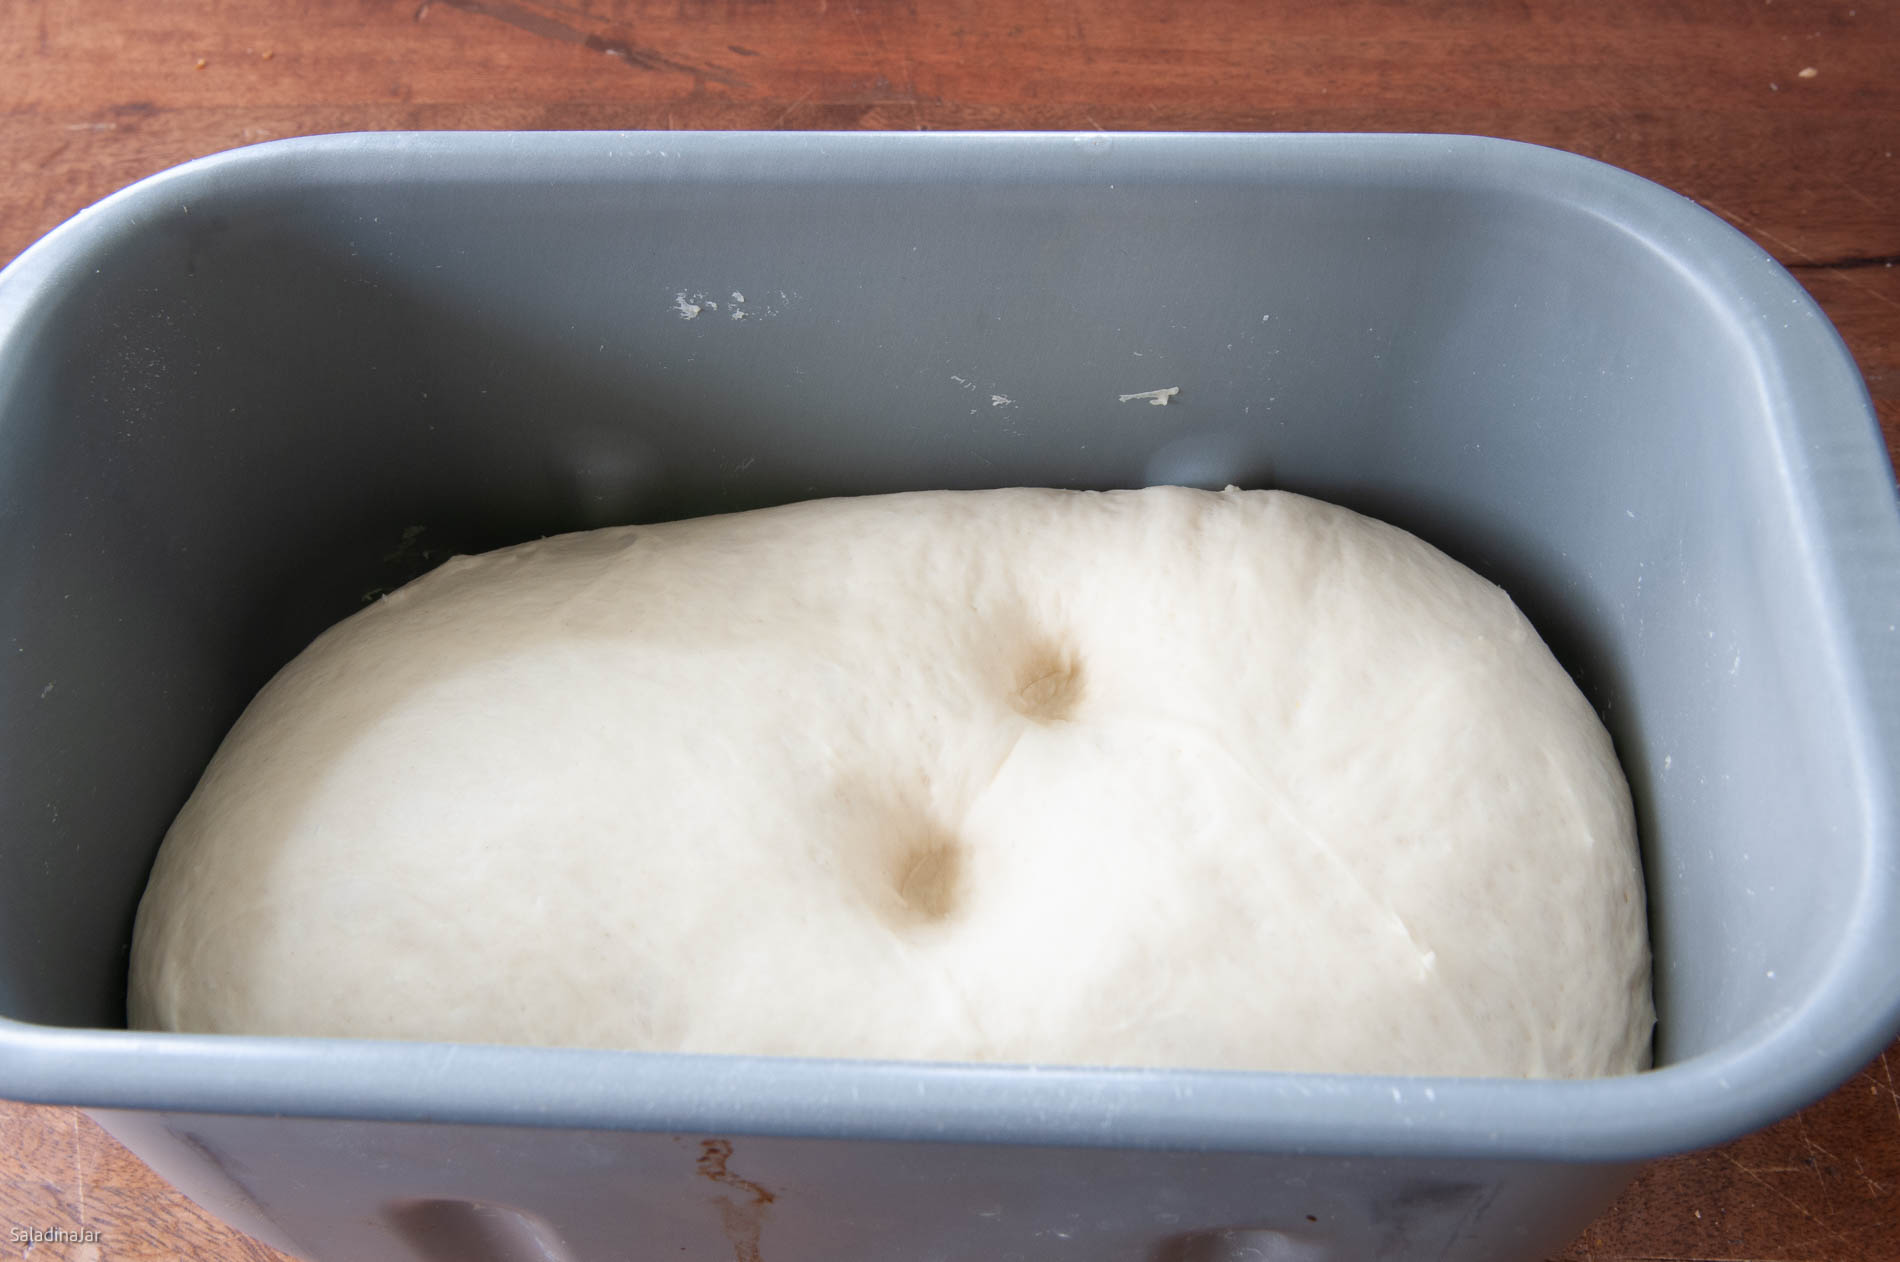 testing dough to see if it's ready to shape.